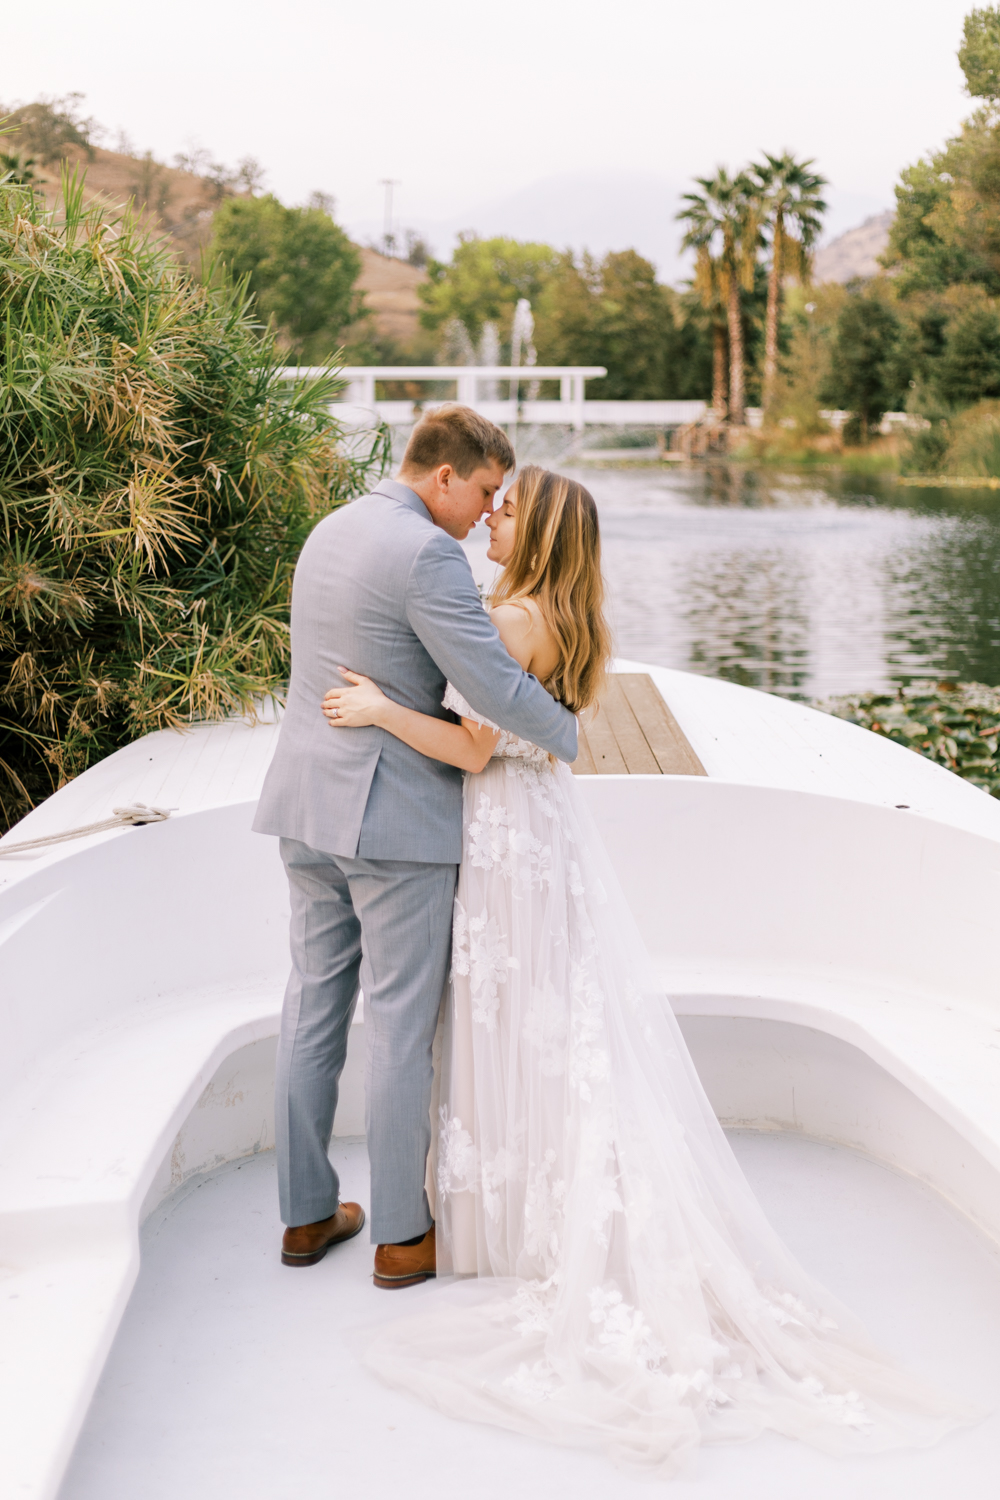 bride and groom embracing on a boat at sunset lakeside